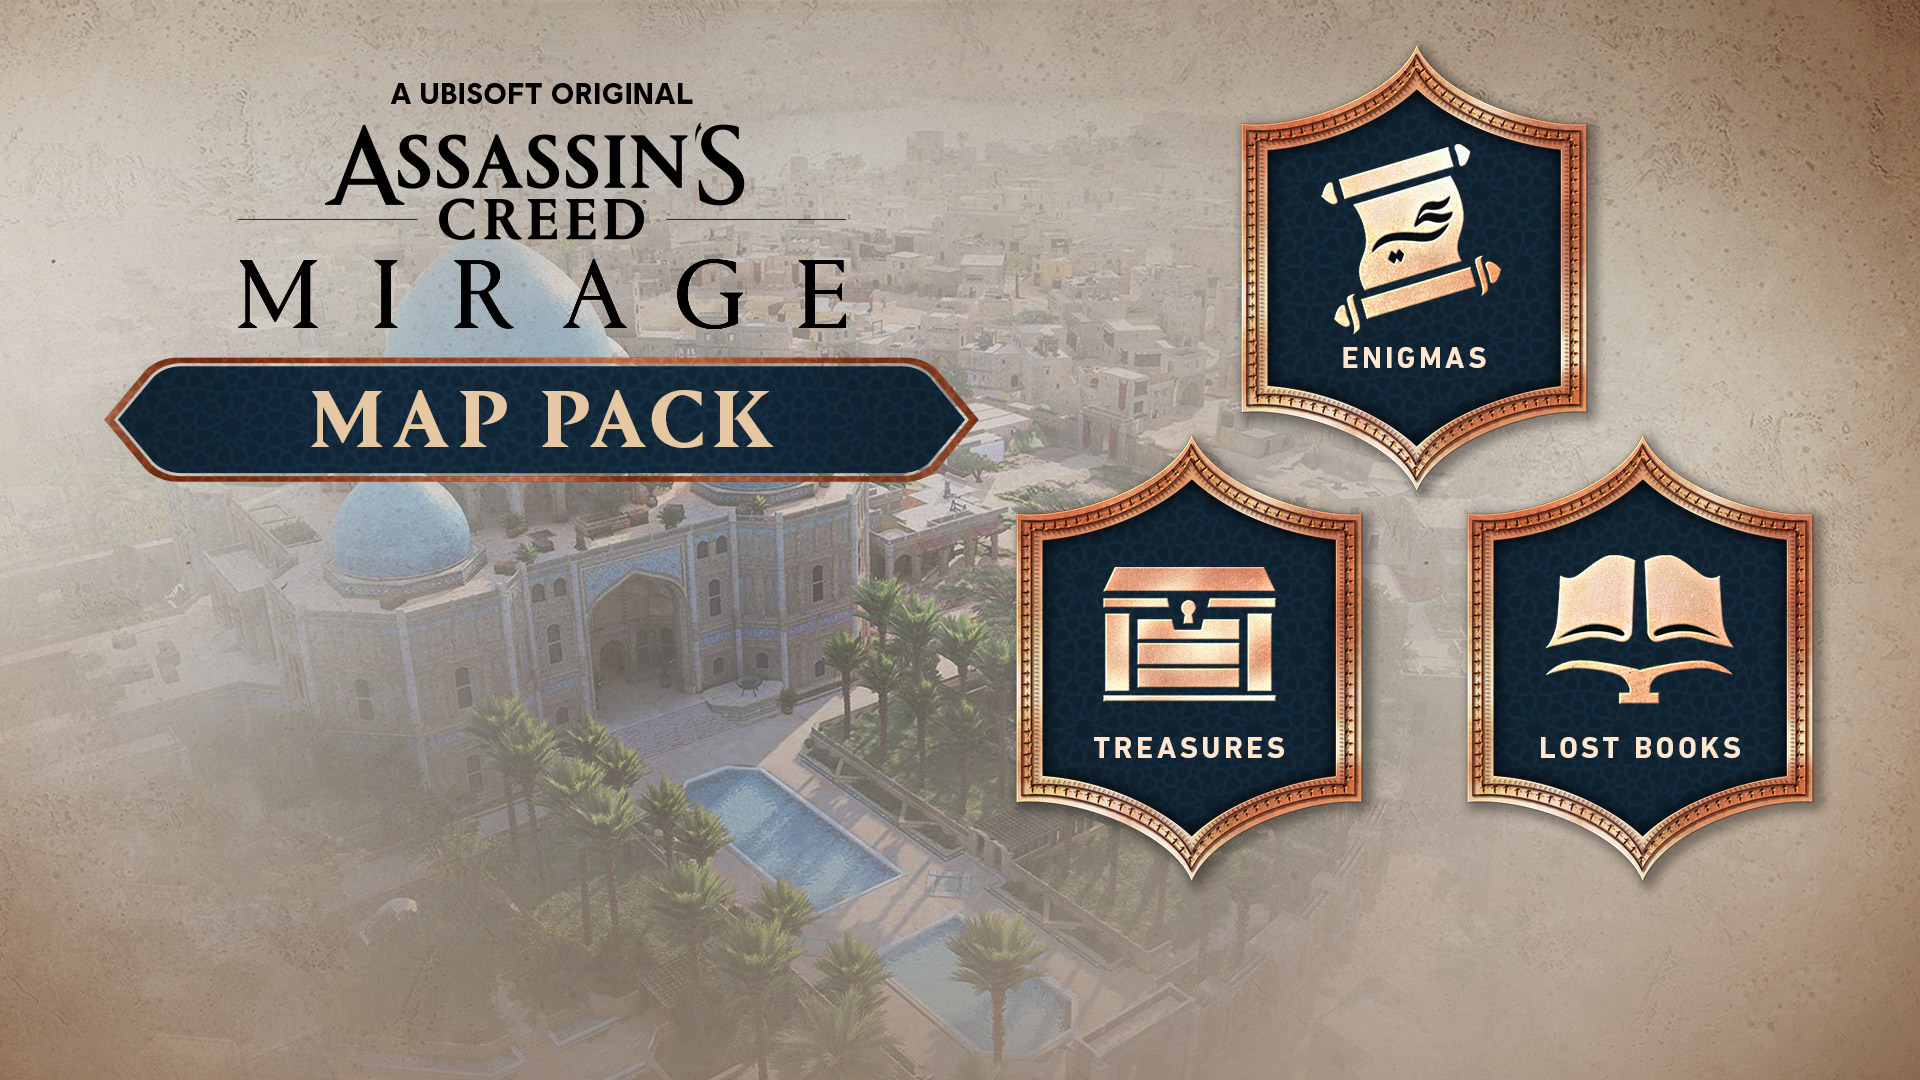 Assassin's Creed Mirage - Map Pack DLC AR XBOX One / Xbox Series X|S CD Key 7.9 $